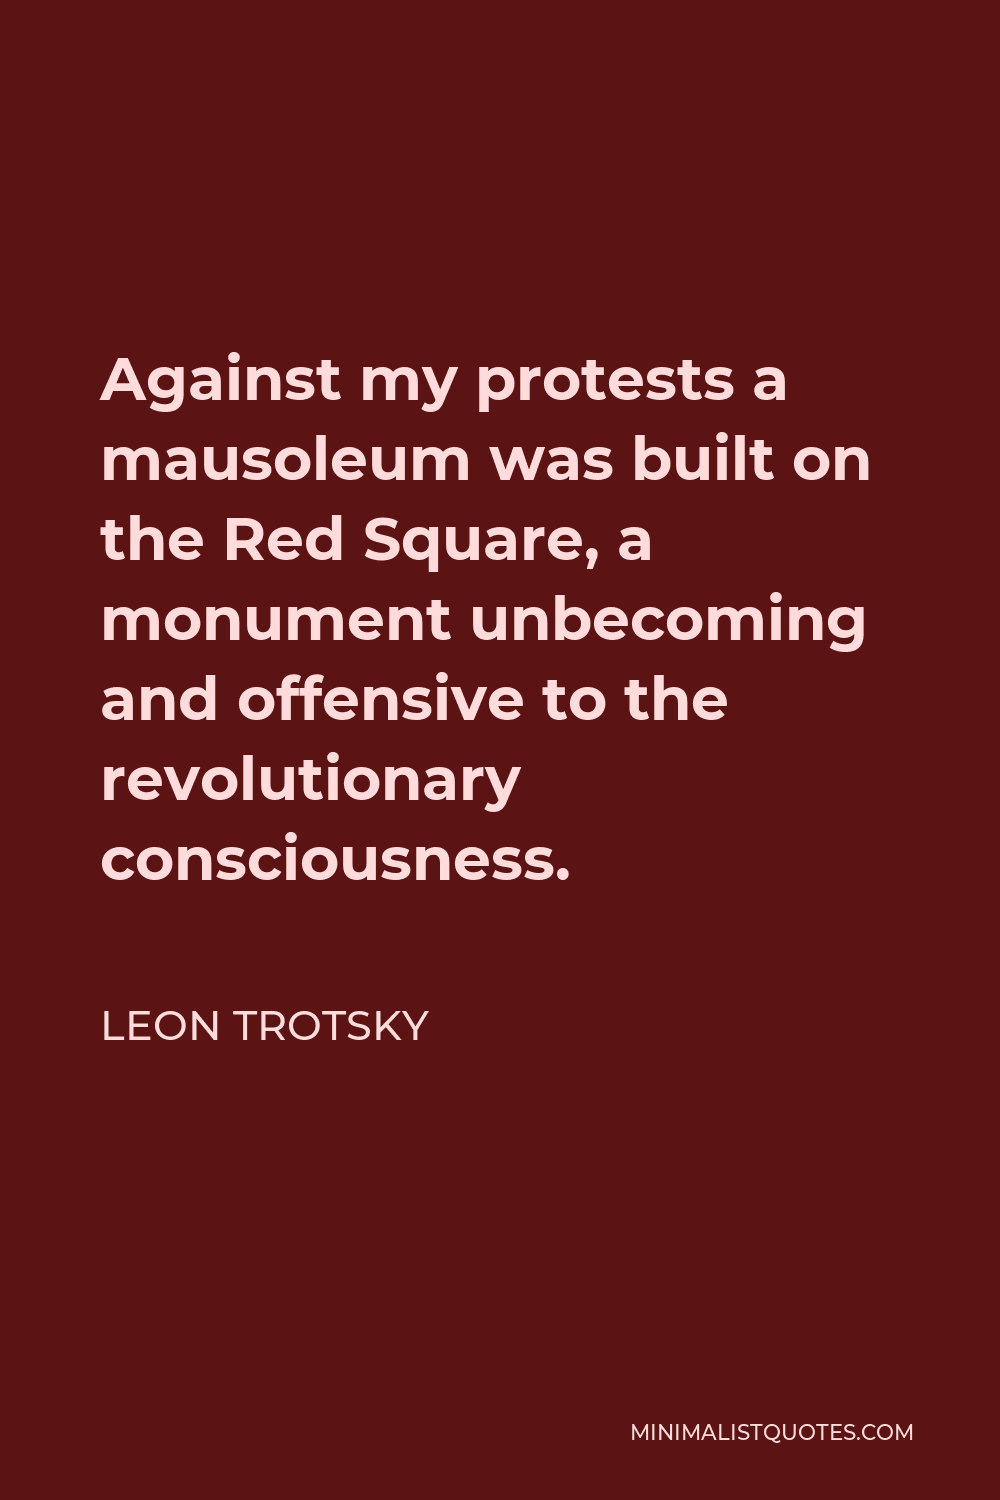 Leon Trotsky Quote - Against my protests a mausoleum was built on the Red Square, a monument unbecoming and offensive to the revolutionary consciousness.